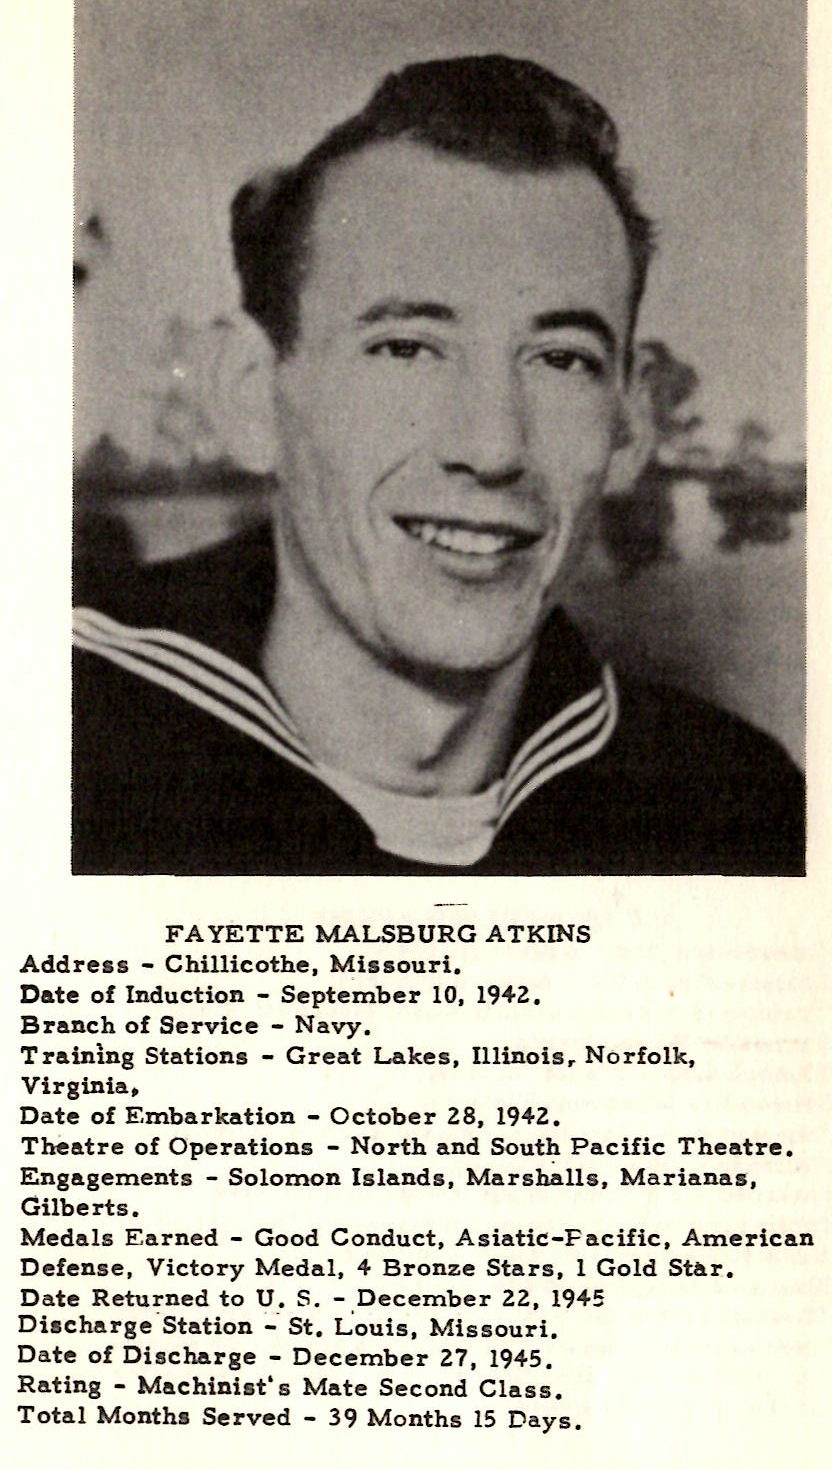 FAYETTE MALSBURG ATKINS Address - Chillicothe, Missouri. Date of Induction - September 10, 194Z. Branch of Service - Navy. Tratnlng Stations - Great Lakes, Illinoisr Norfolk, Virginia~ Date of Embarkation - October ZS, 1942. Theatre of Operations - North and South Pacific Theatre. Engagements - Solomon Islands, Marsfullls, Marianas, Gilberts. Medals Earned - Good Conduct, Asiatic-Pacific, American Defense, Victory Medal, 4 Bronze Stars, l Gold Star. Date Returned to U. S. - December 22, 19-45 Di• charge'Station - · St.Louis, Missouri. Date of Discharge - December Z7, 1945. Rating - Machinist's Mate Second Class. Total Month• Served - 39 Months 15 Days. HOWARD ELDON